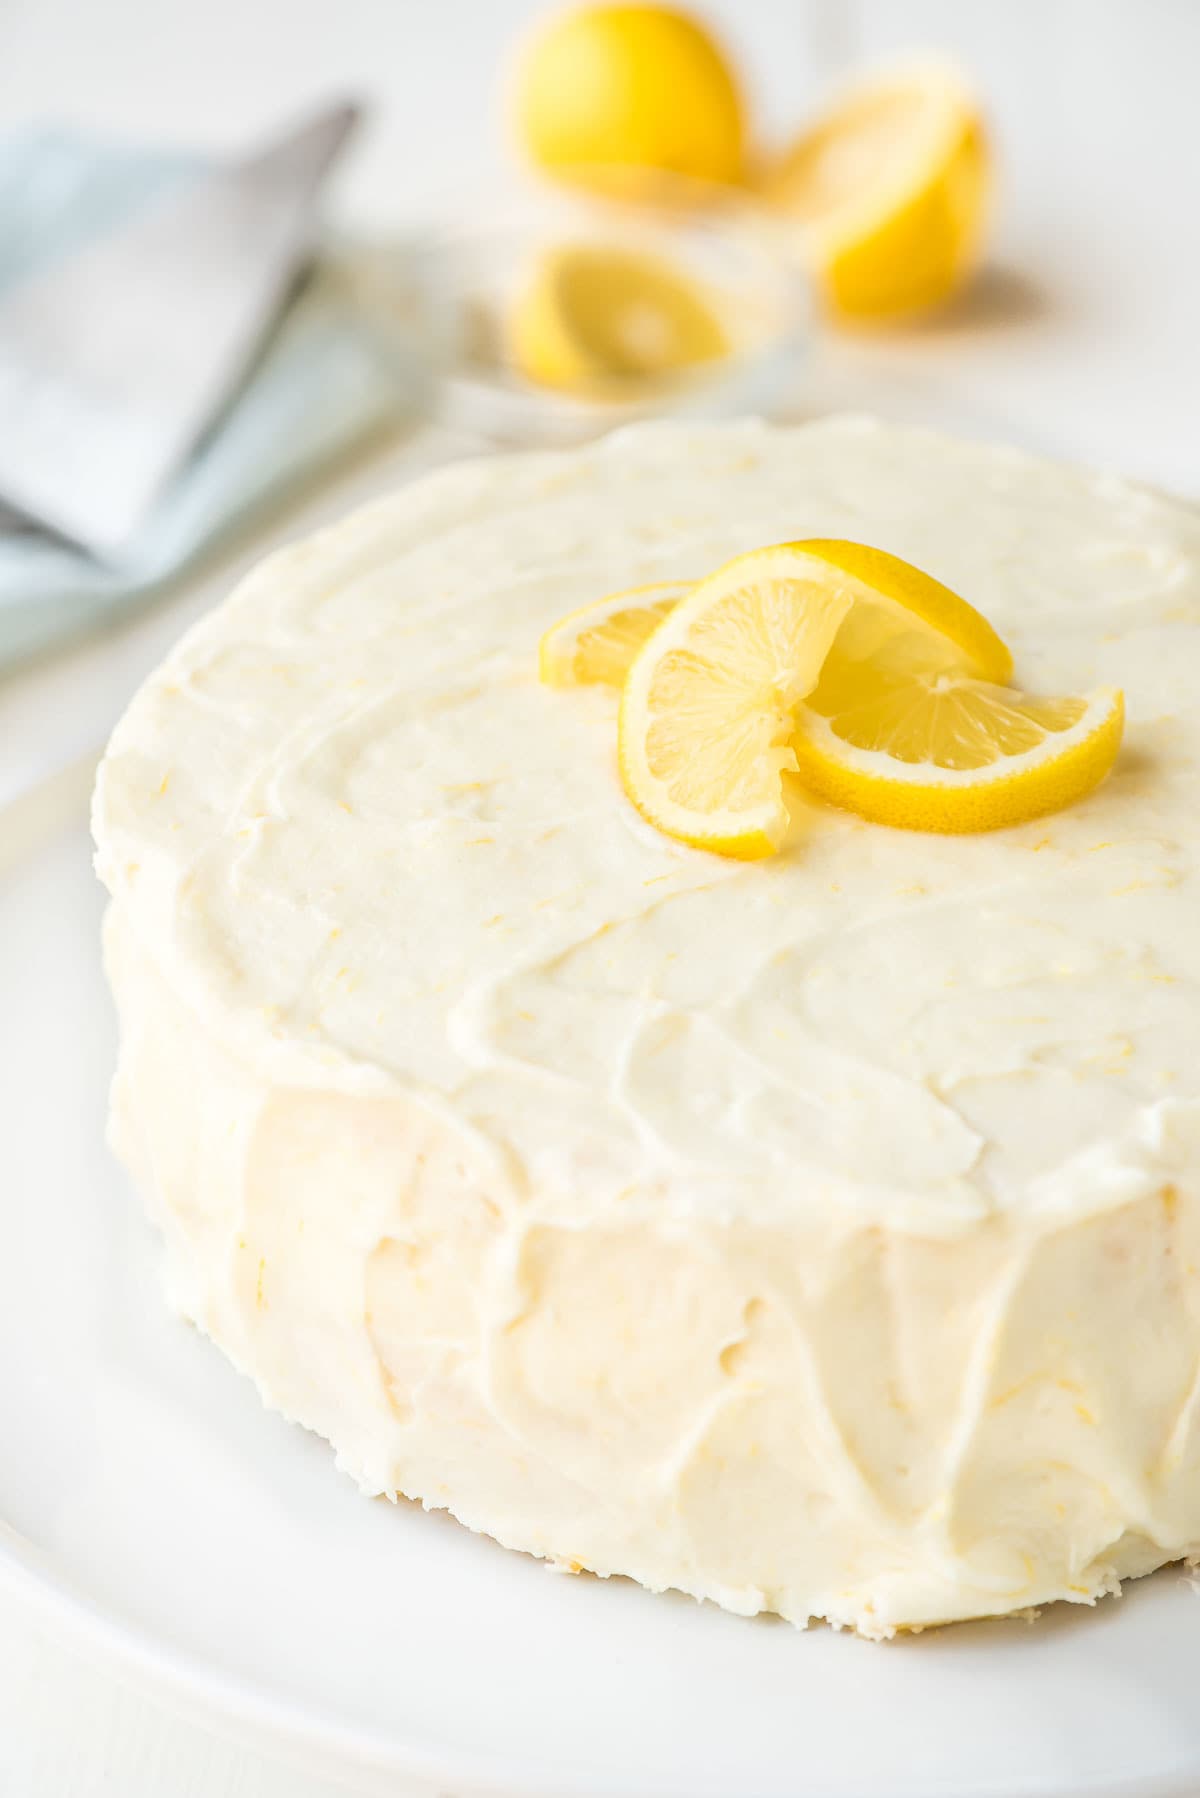 Beautifully frosted lemon cake with lemon cream cheese frosting and lemon slices on top